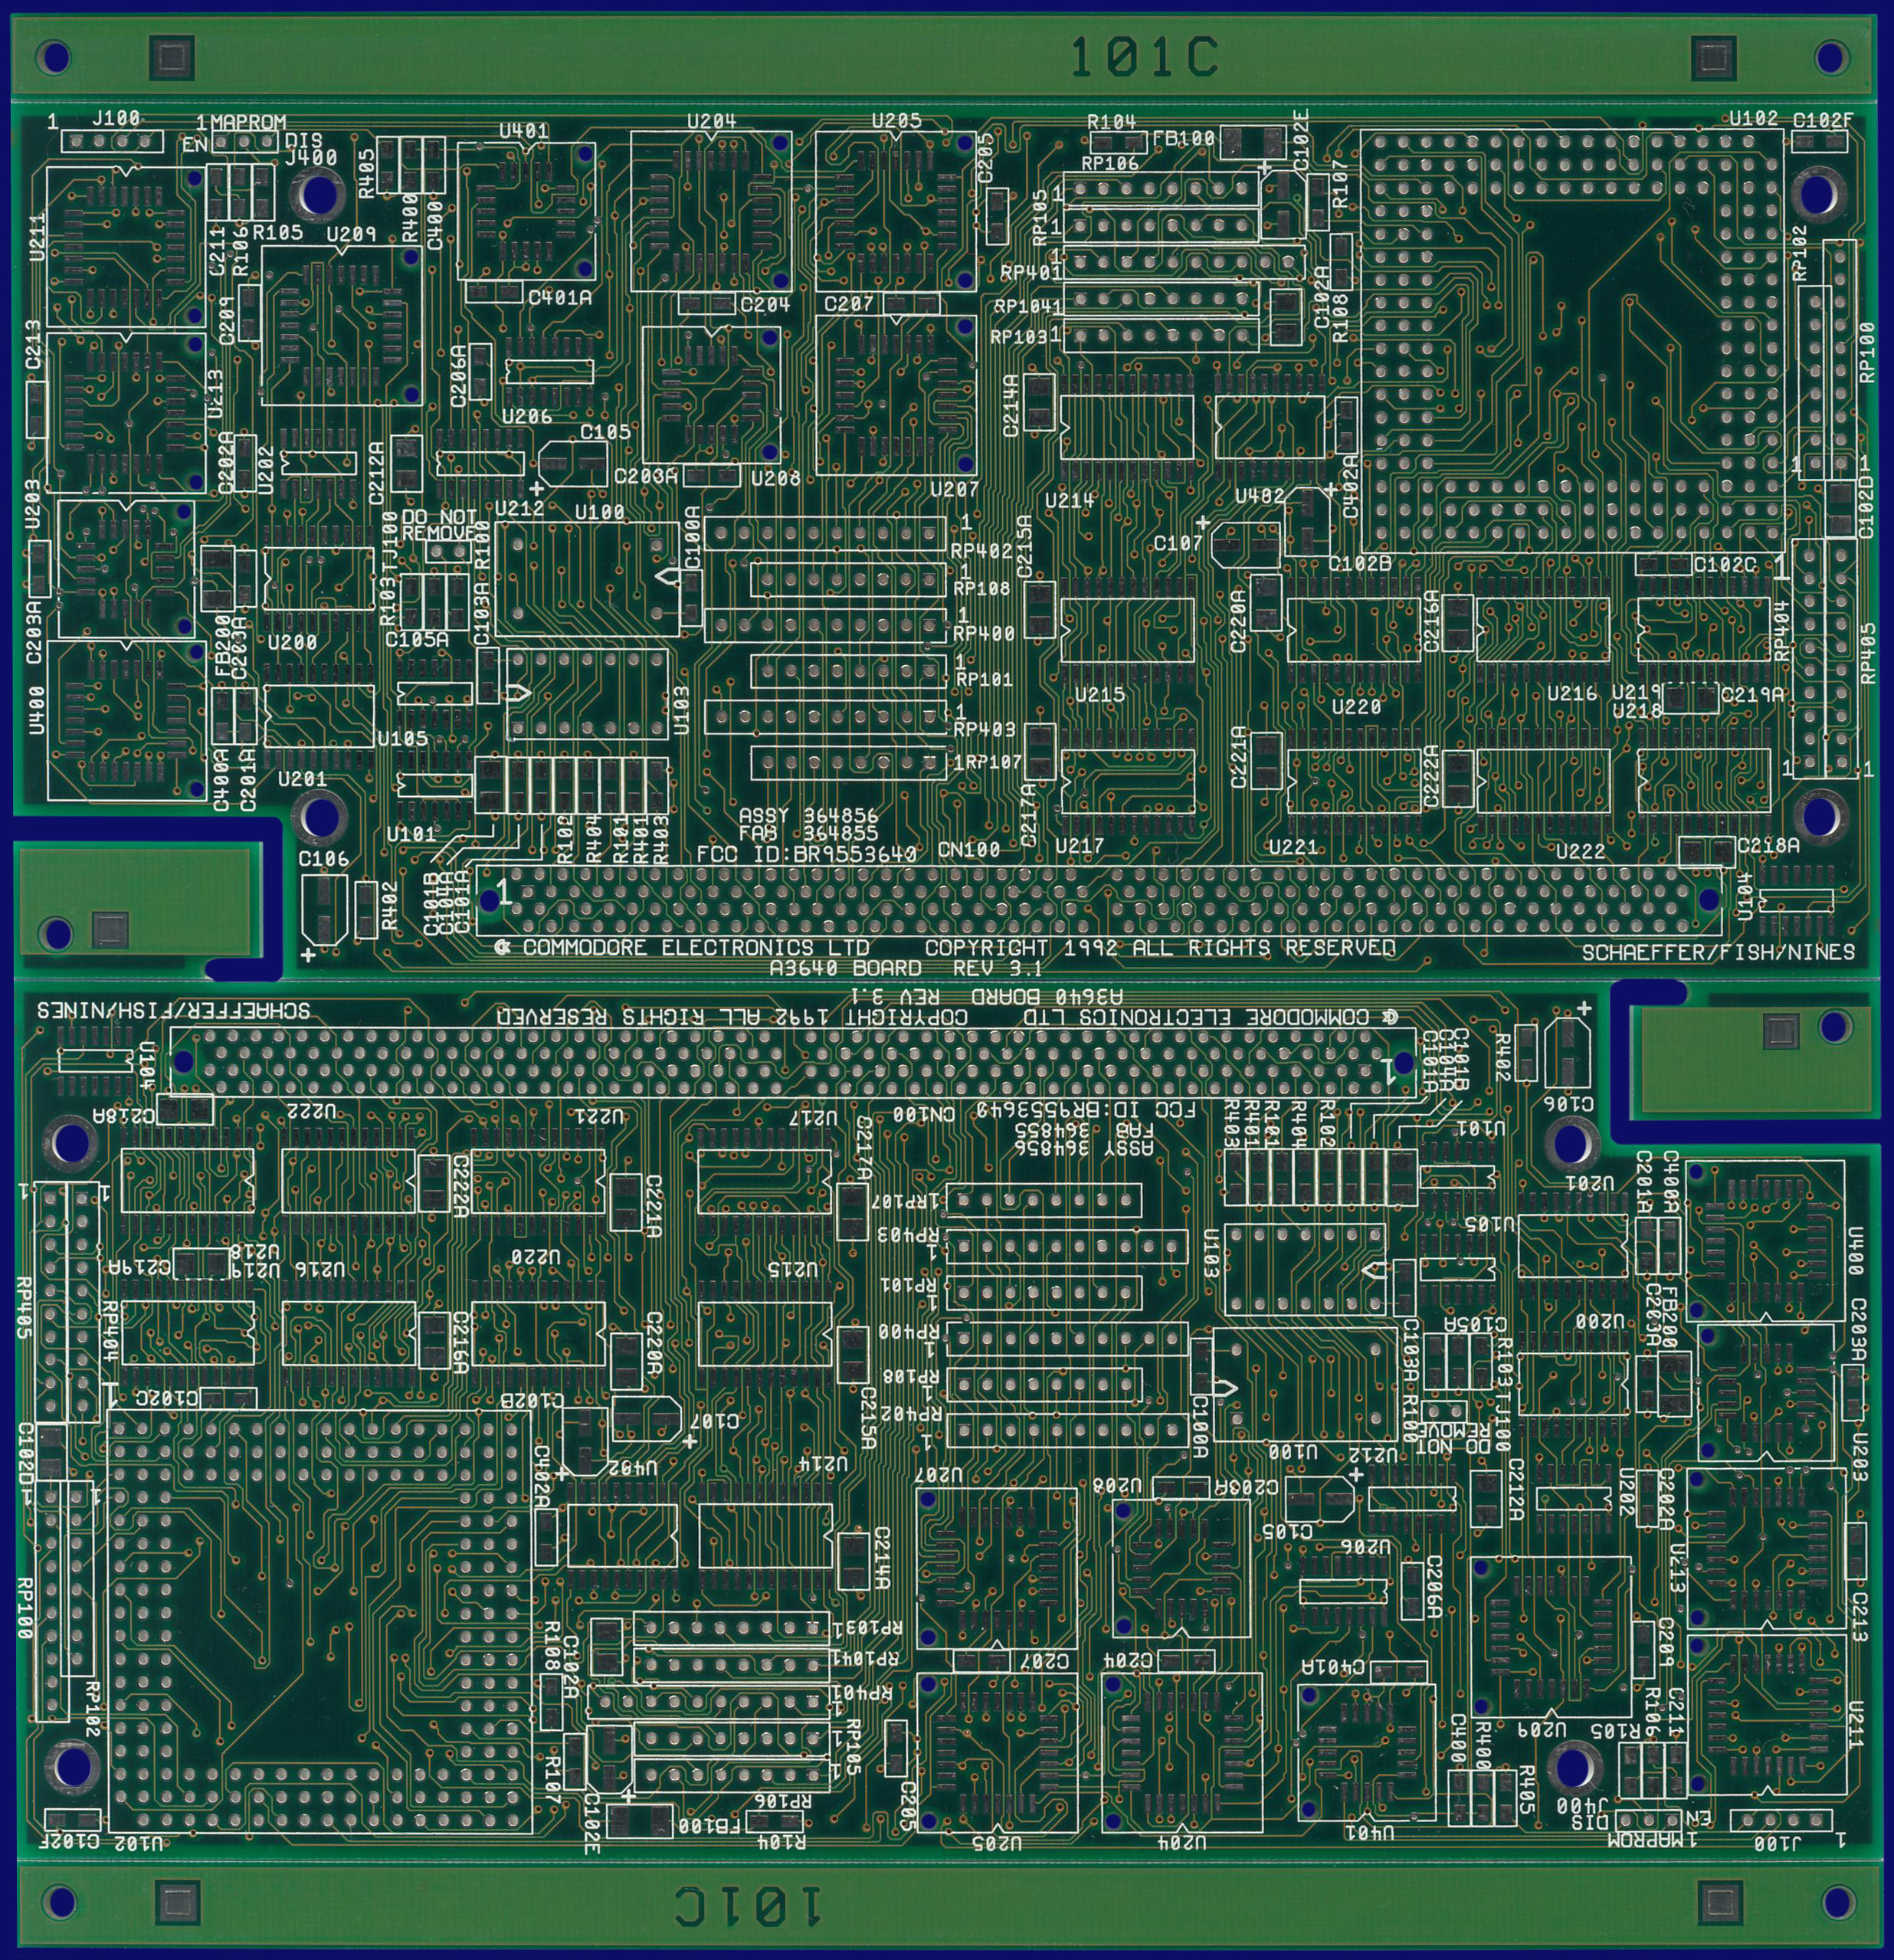 Commodore A3640 - blank PCB, front side